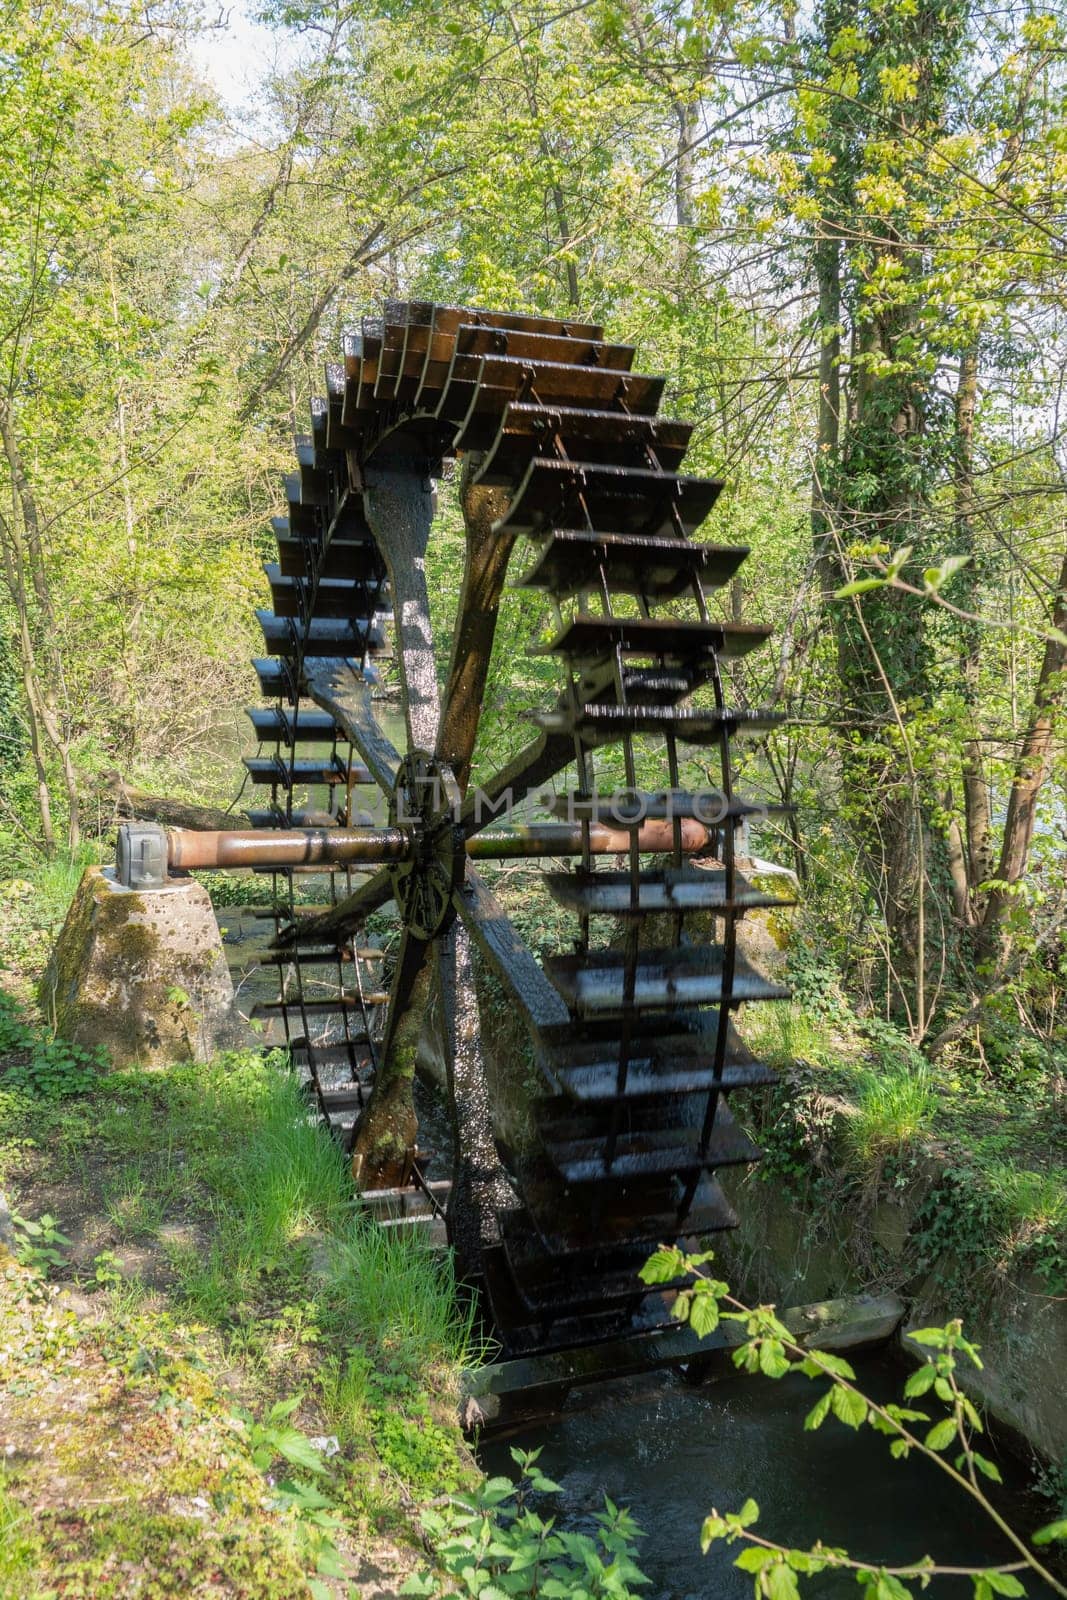 The old water wheel is located on the lake surrounded by trees and rocks on a sunny day.